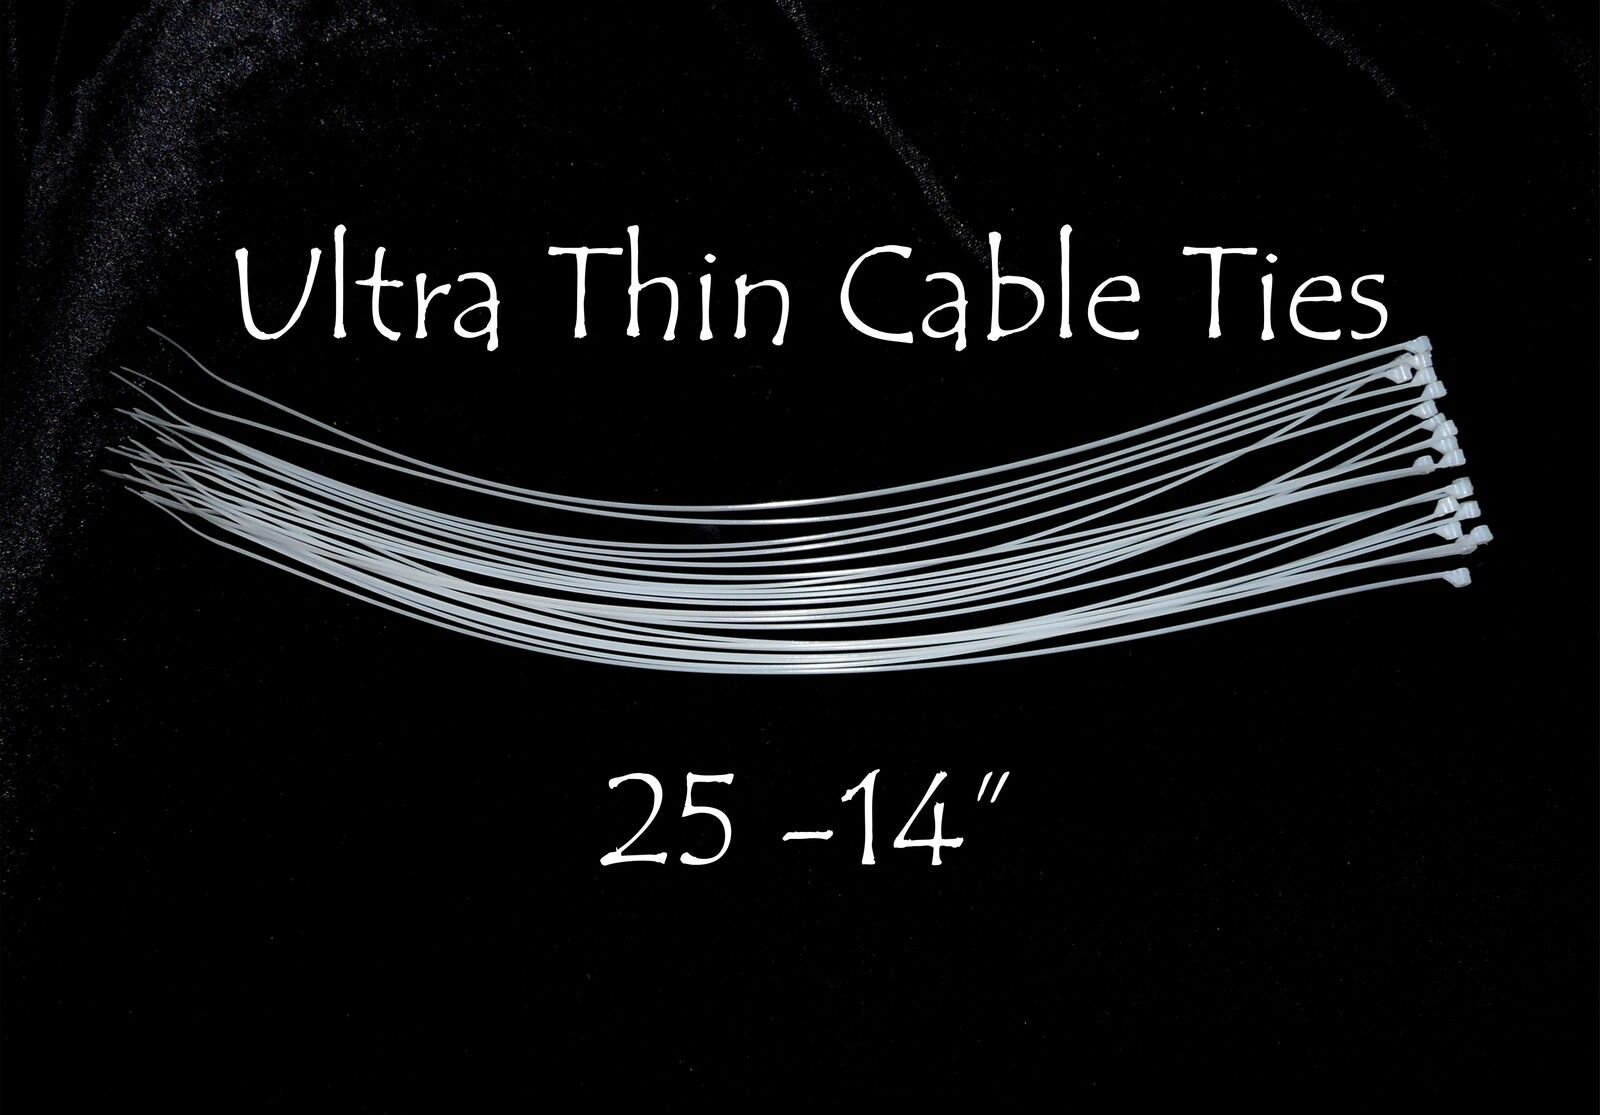 Ultra Thin Cable Ties for Reborn doll supply,  25  - 14